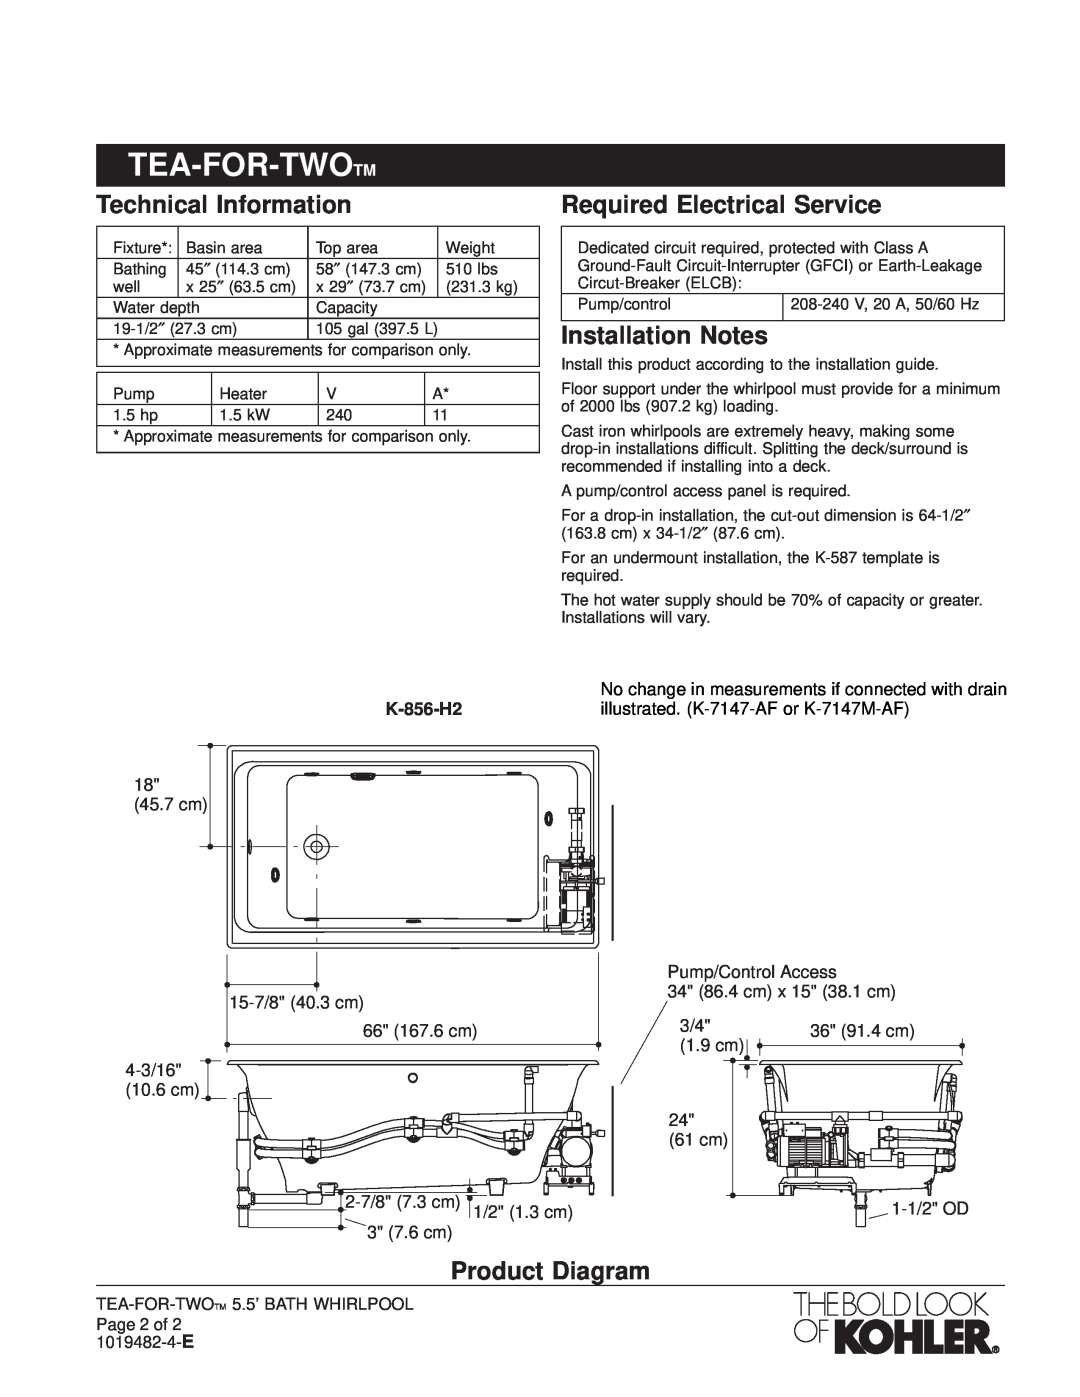 Kohler K-856-RH Technical Information, Required Electrical Service, Installation Notes, Product Diagram, K-856-H2 